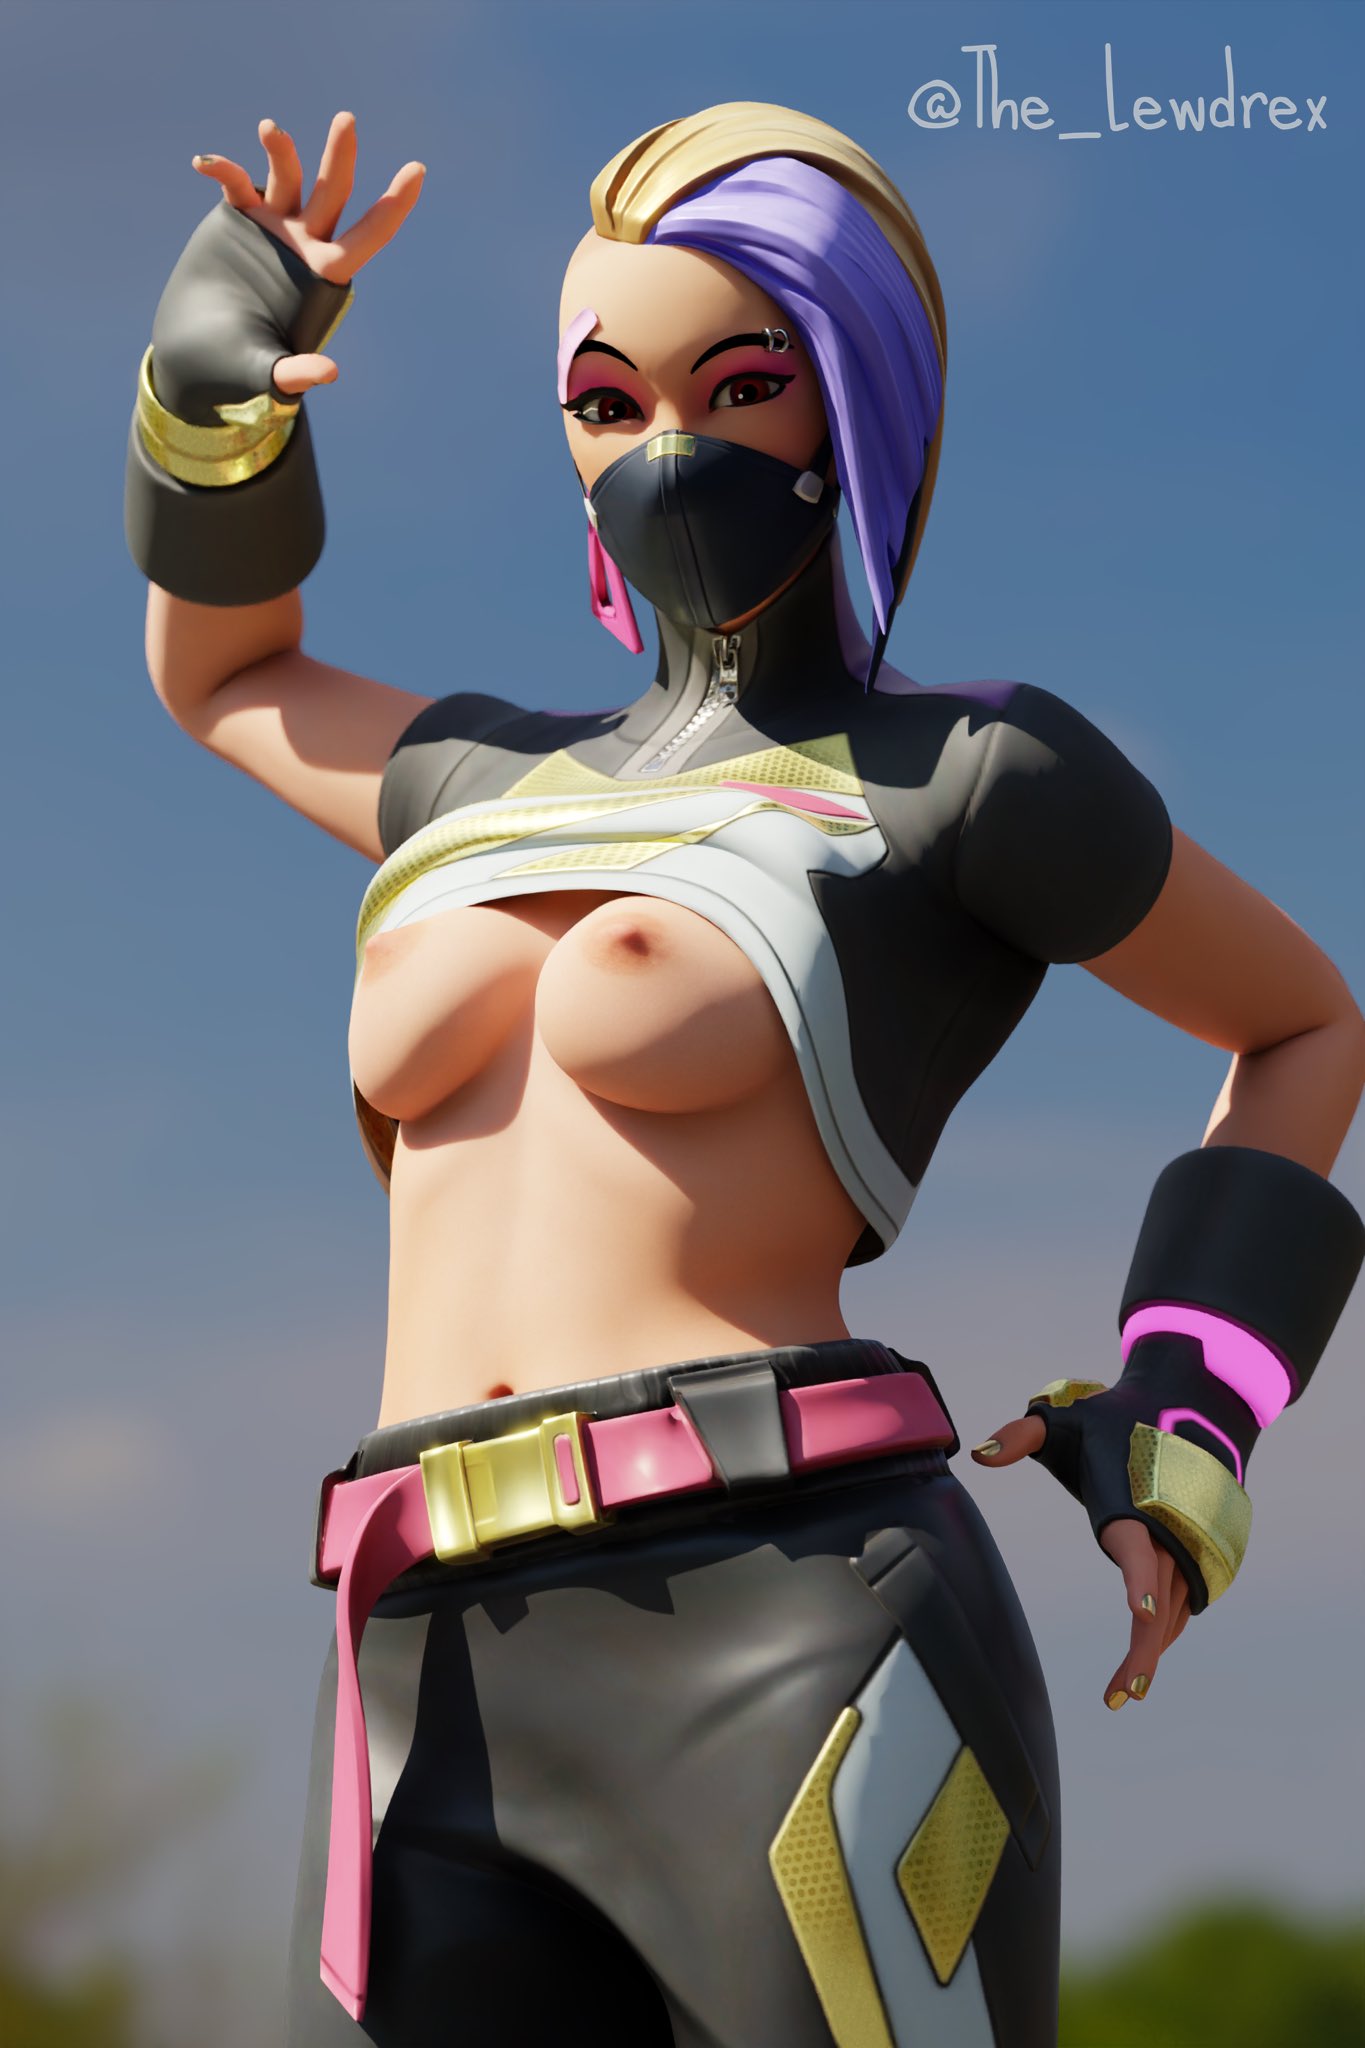 Fortnite catalyst naked - 🧡 Lewdrex 🔞 on Twitter: "And of course, sh...